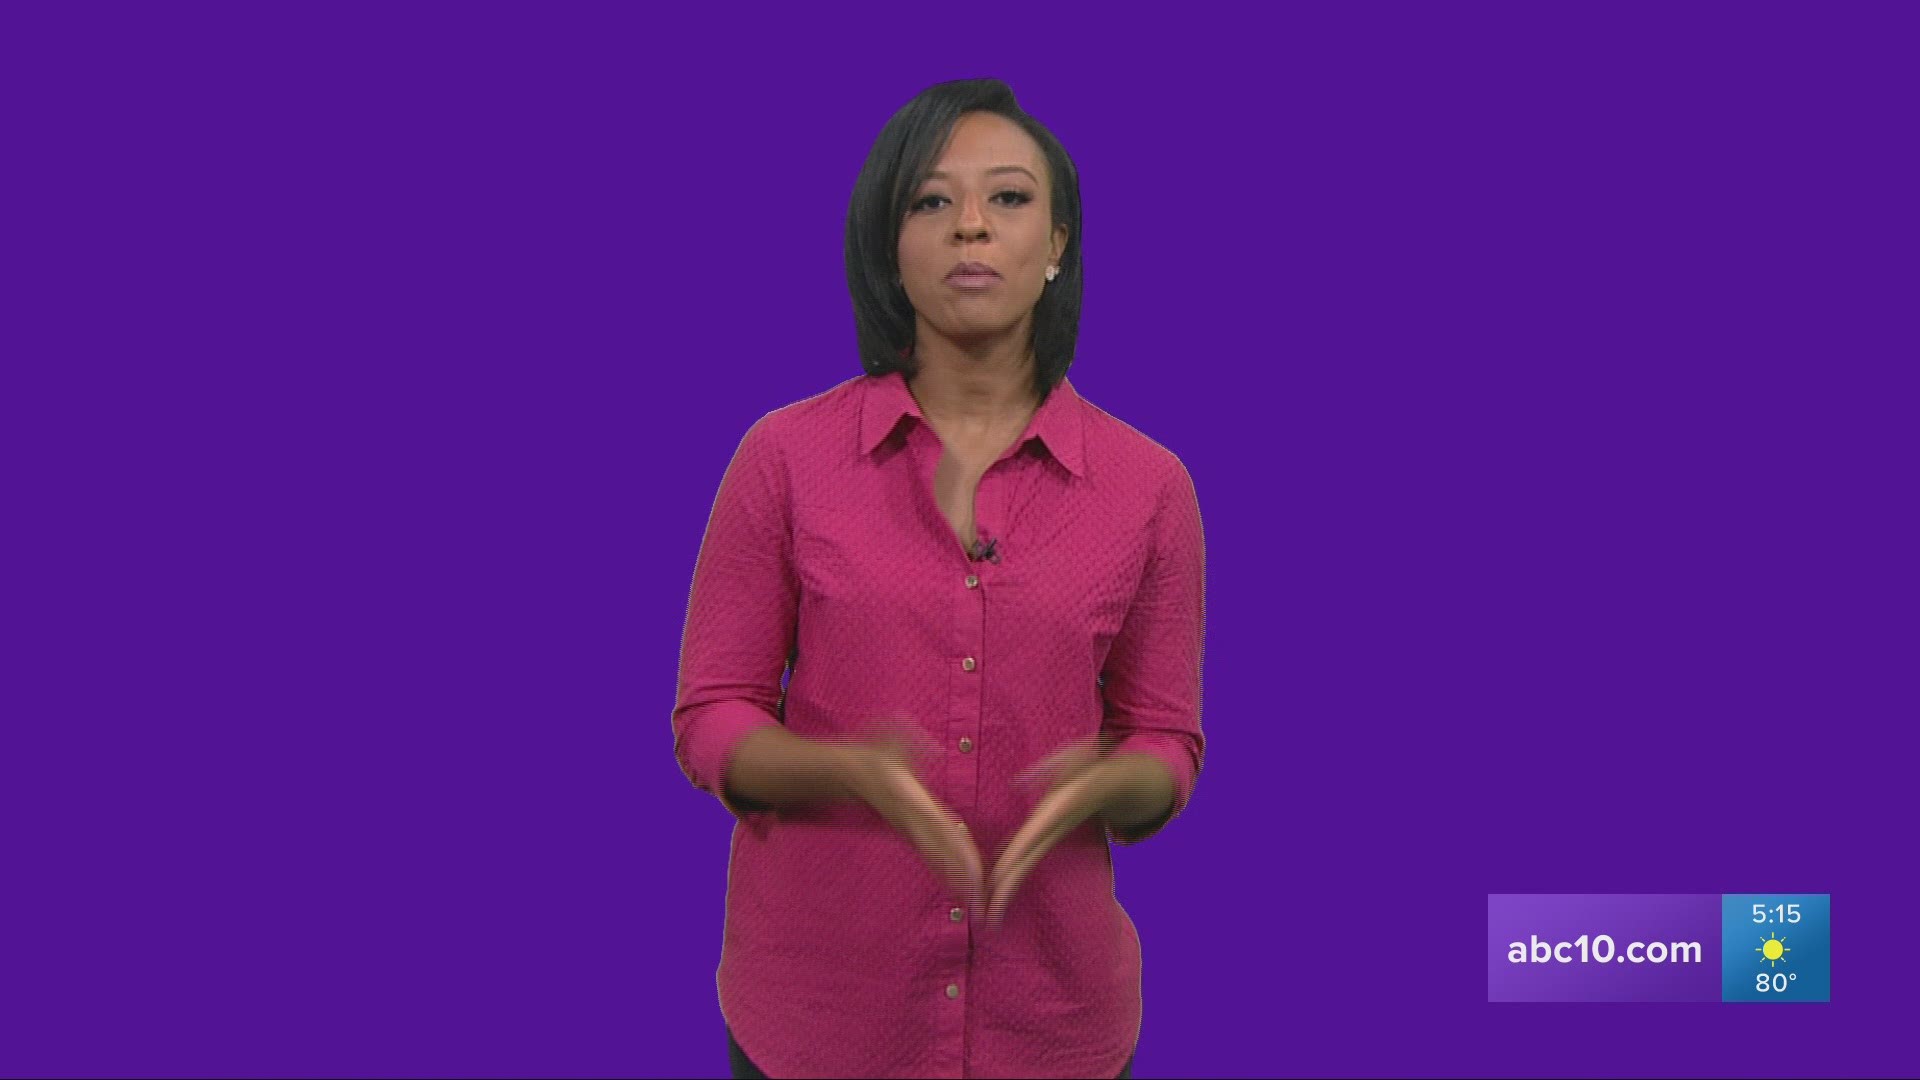 ABC10's Lina Washington gives us a quick look at some things the casual fan might need to know ahead of the Kings regular season opener.